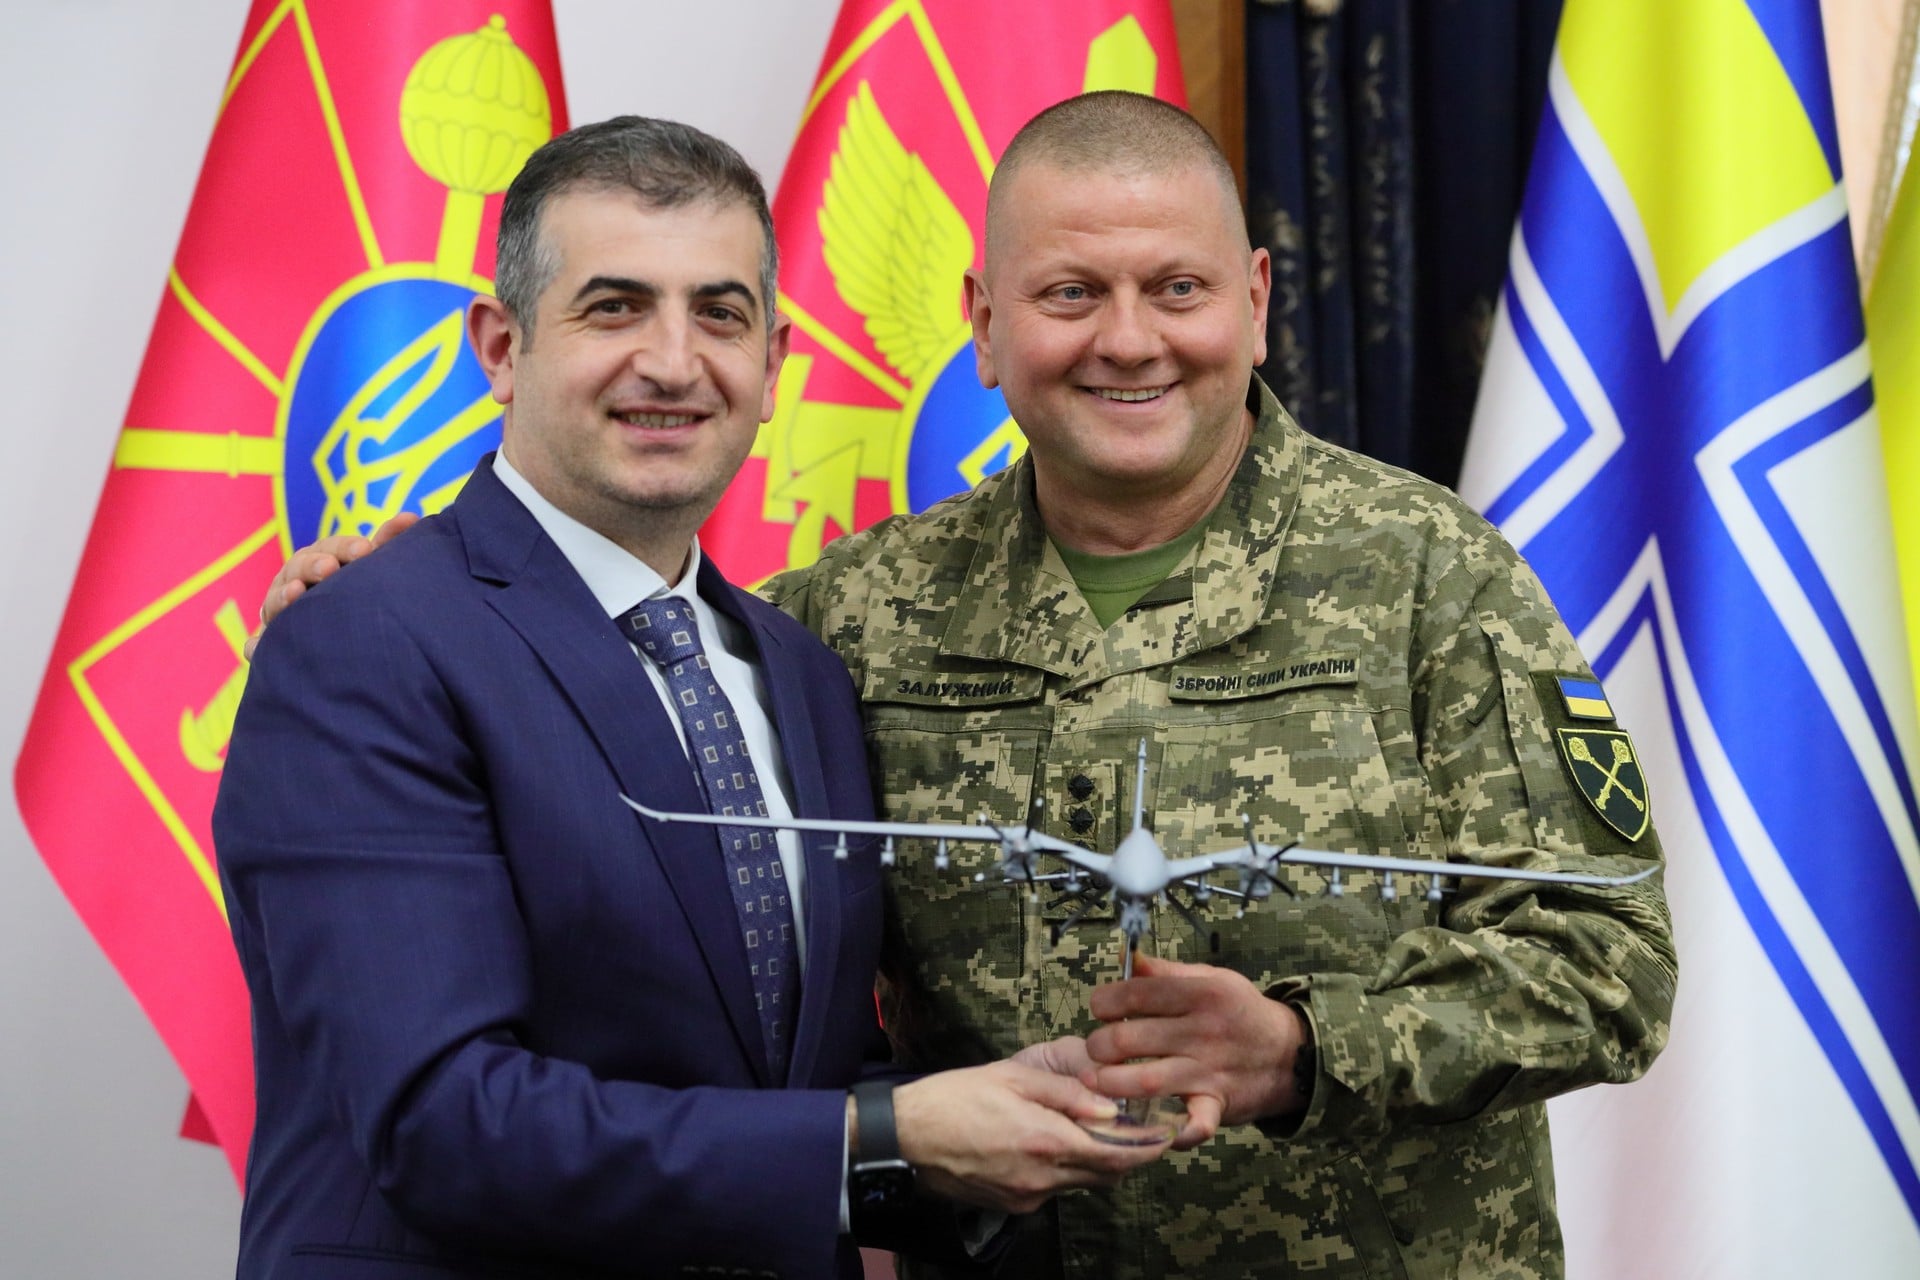 Erdoğan-backed drone company, which angered Russians in Donbass, opens a production facility in Ukraine